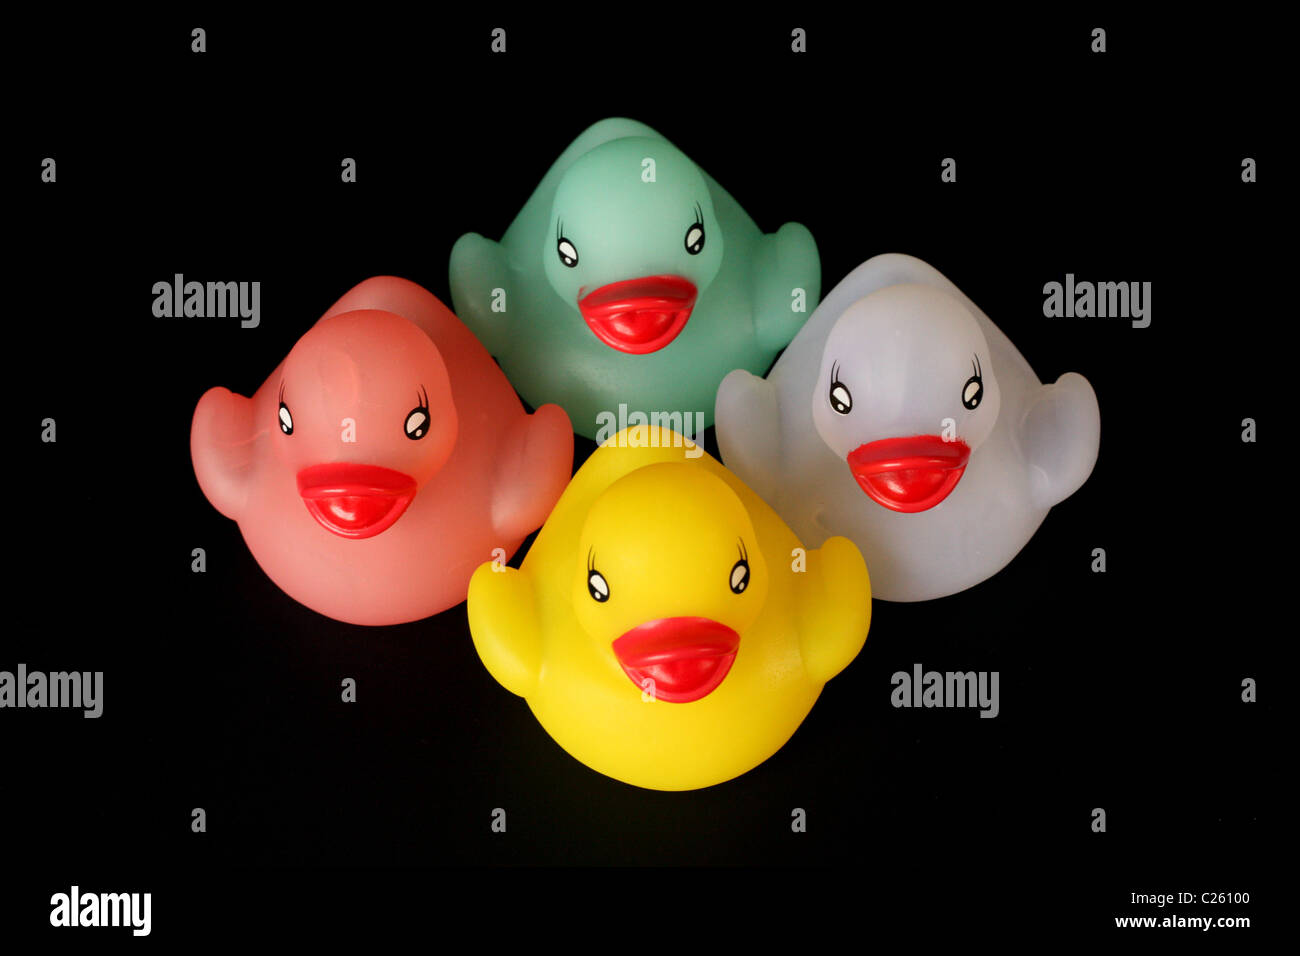 Toy rubber ducks on black background Stock Photo